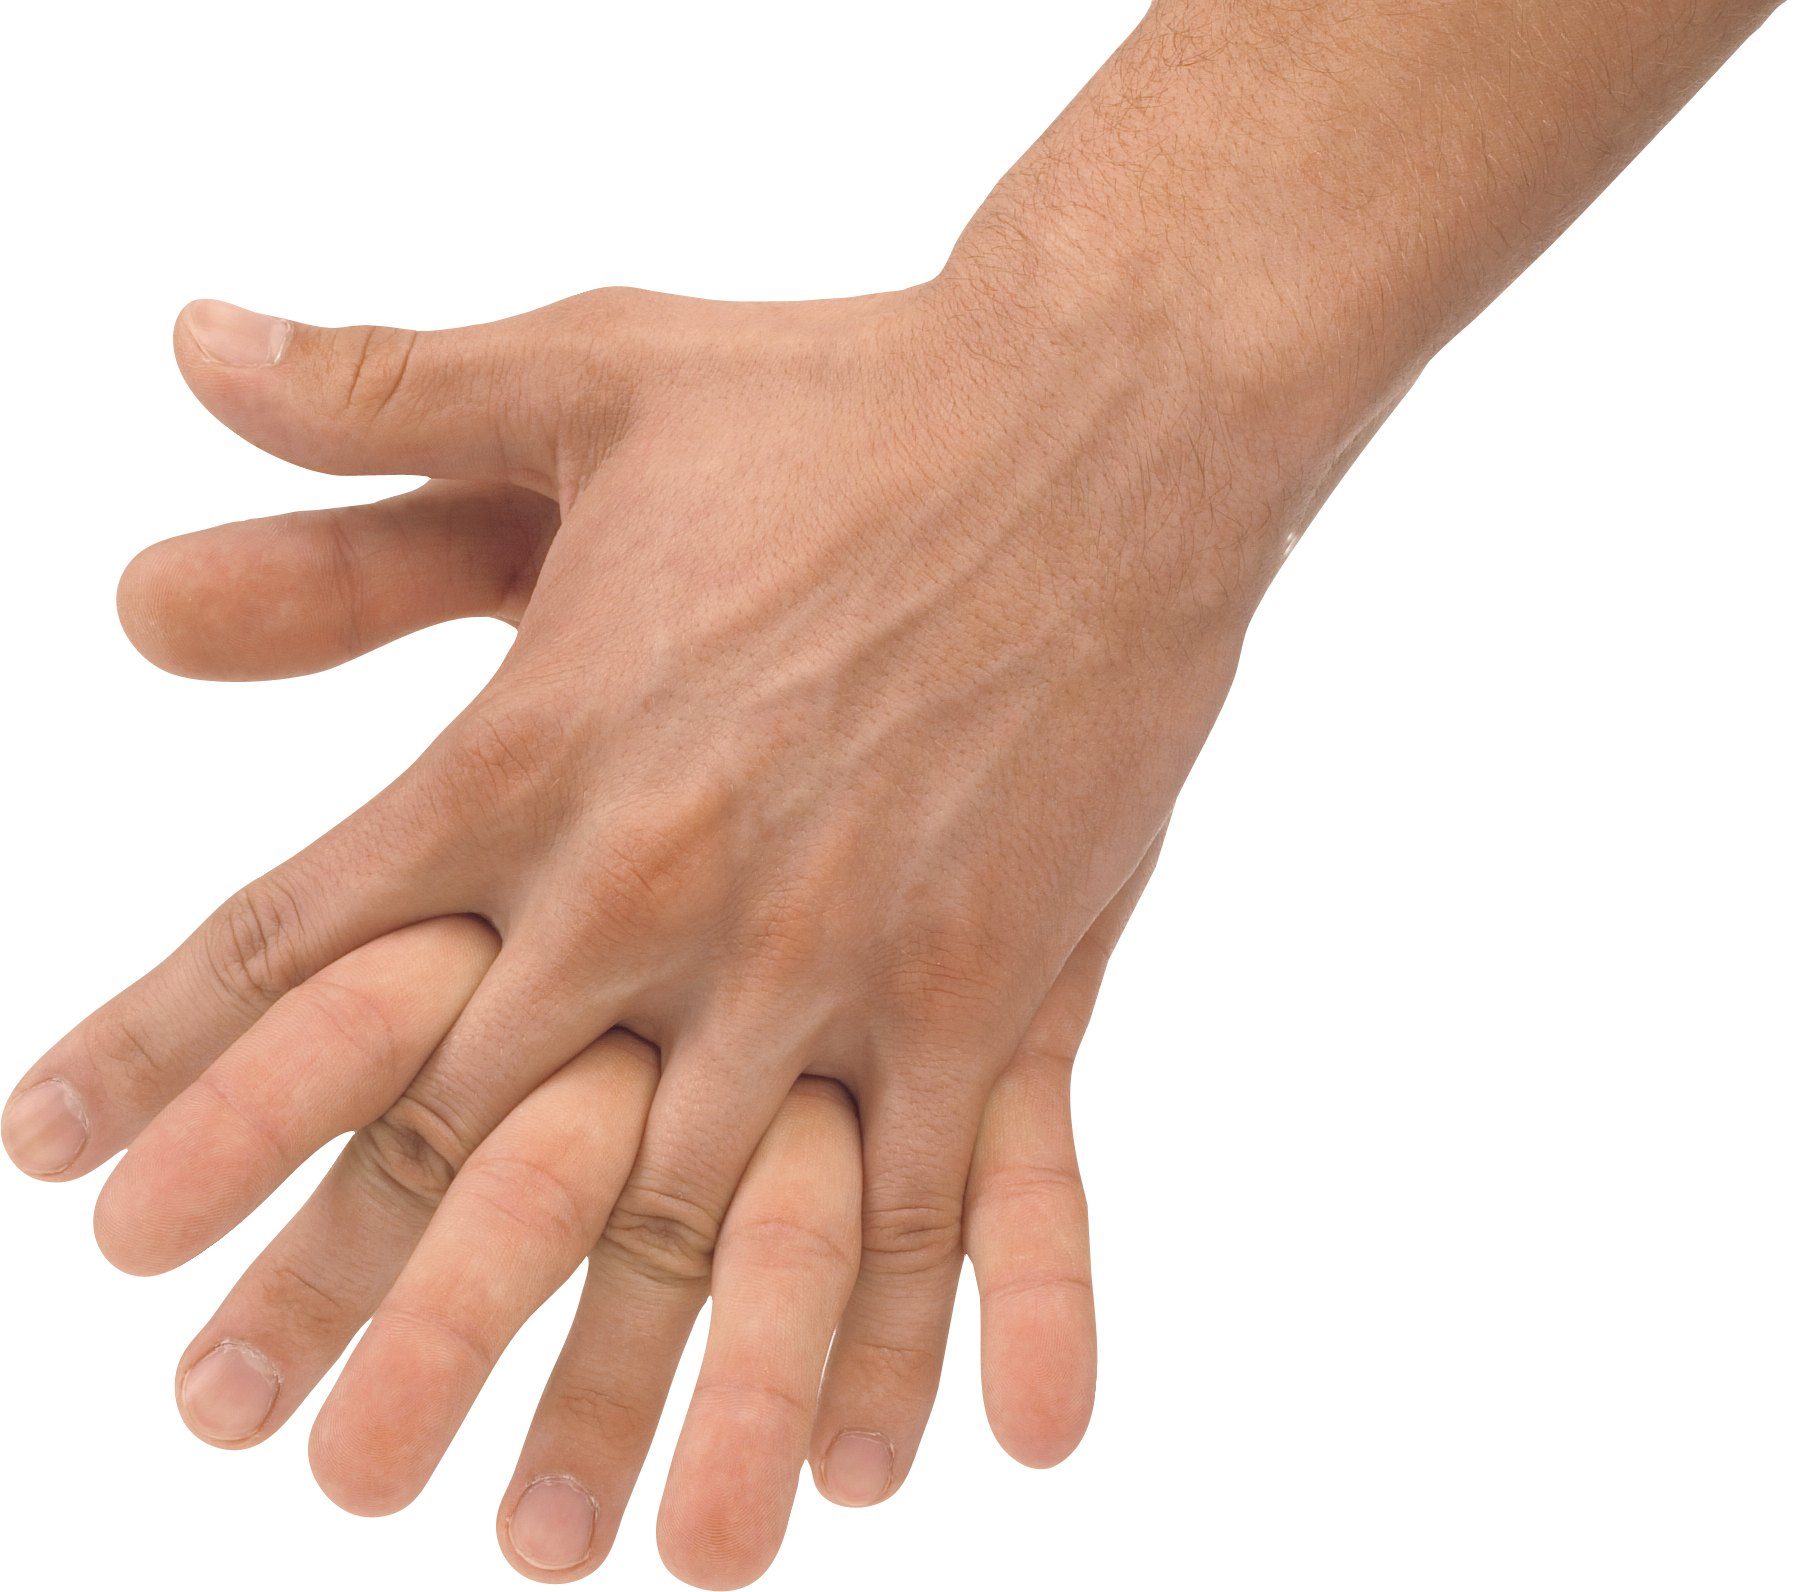 Png Two Hands - Hands Png, Hand Image Free, Transparent background PNG HD thumbnail